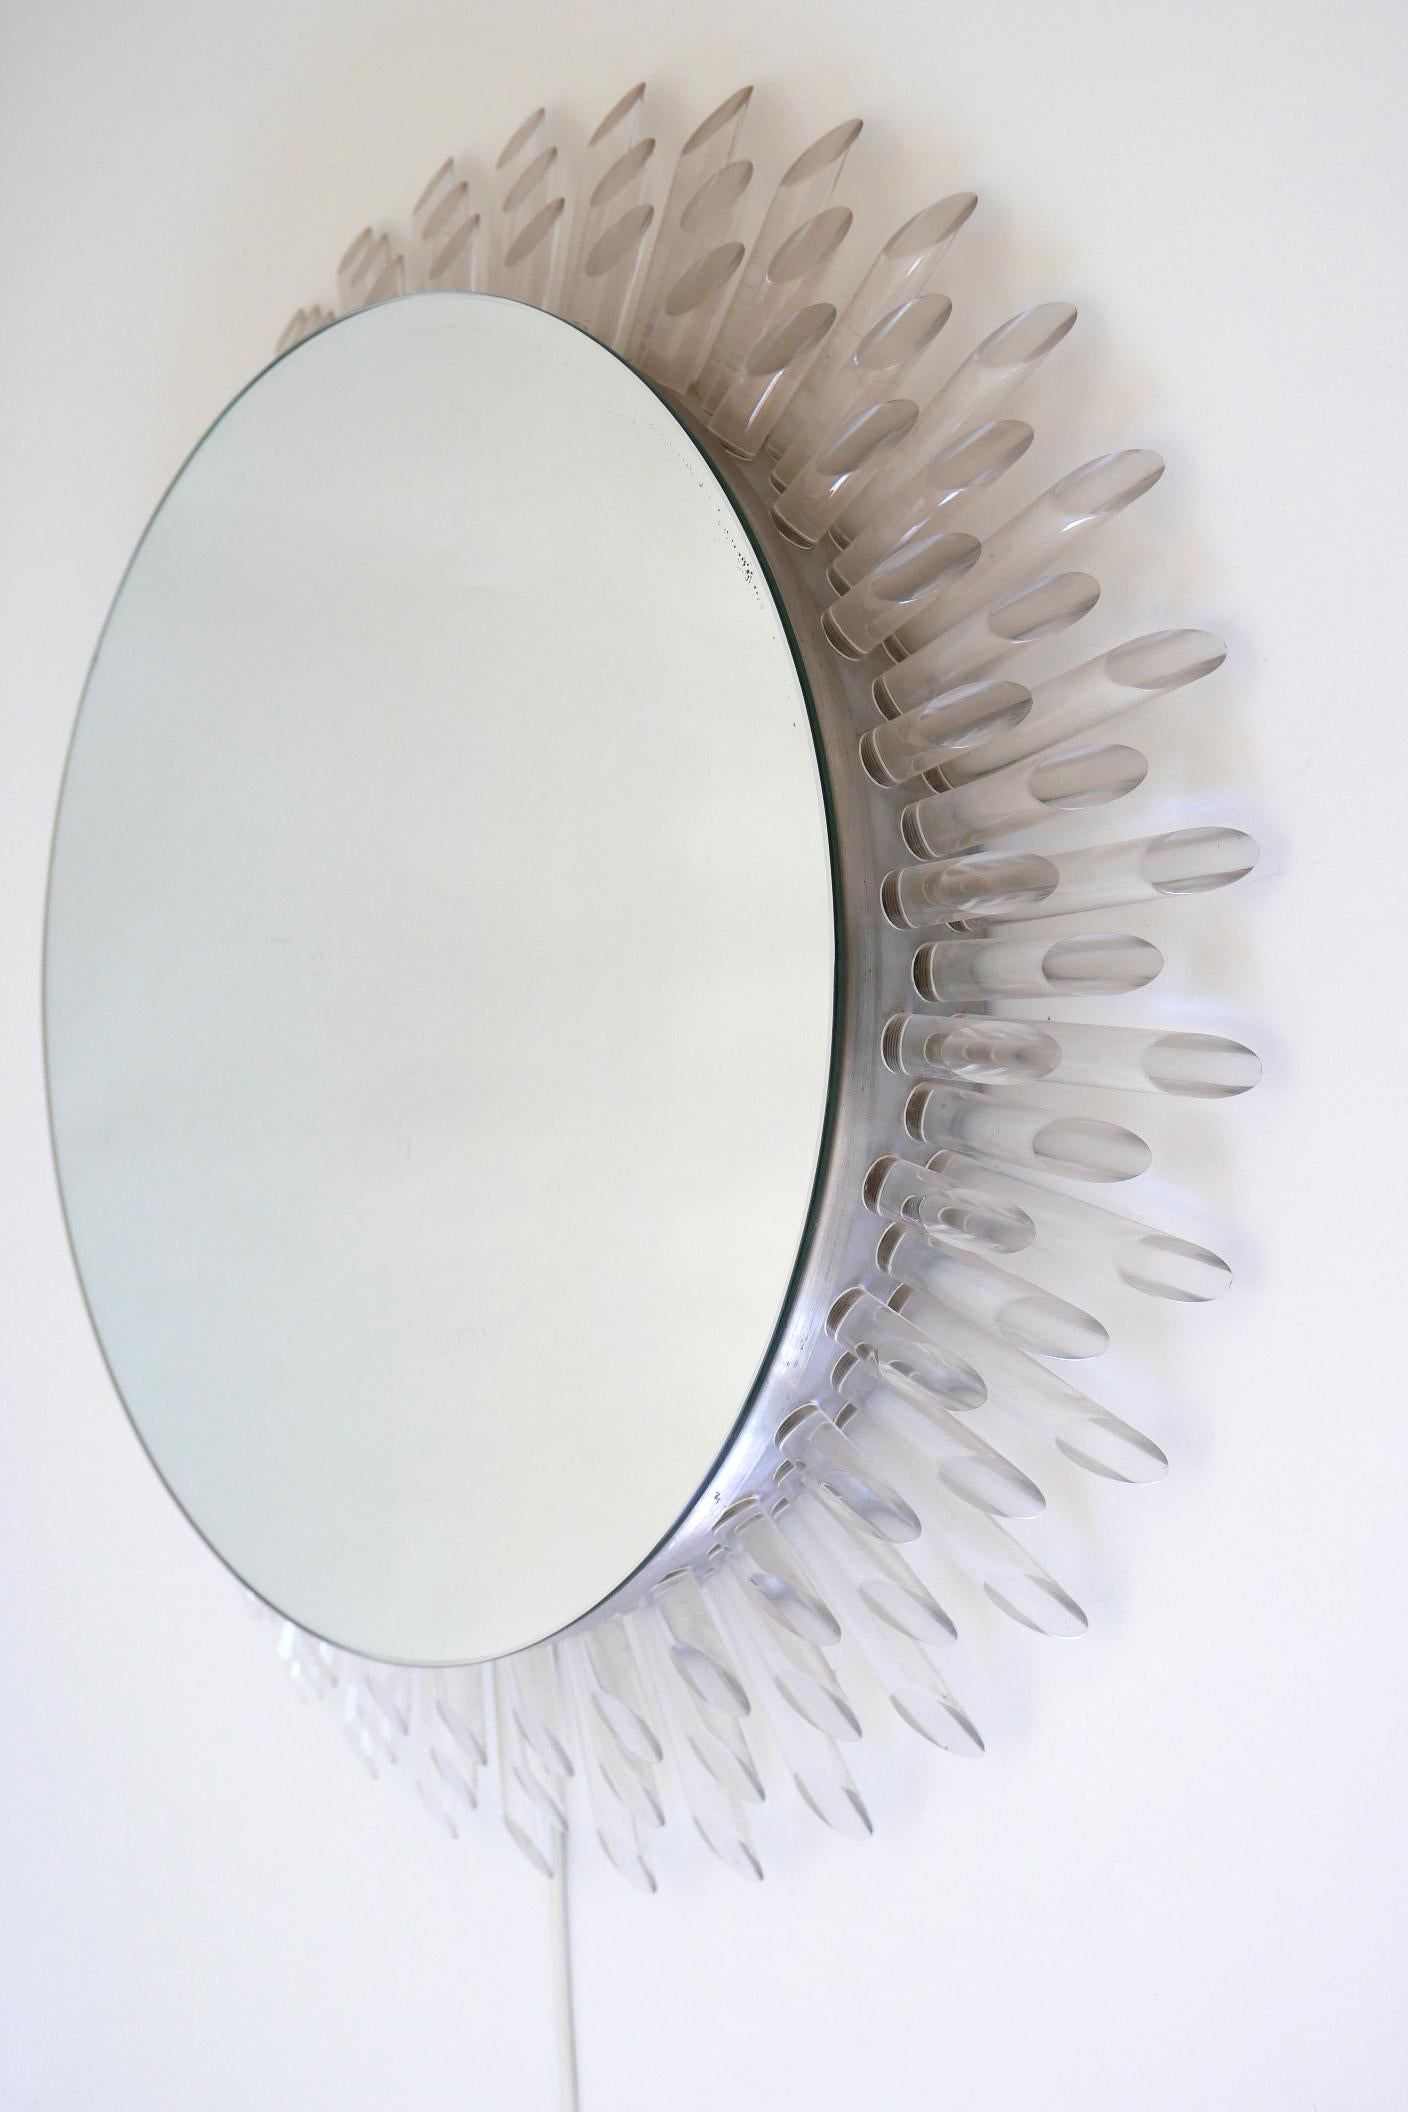 Spectacular Large Mid-Century Modern Backlit Sunburst Wall Mirror Germany 1970s For Sale 8